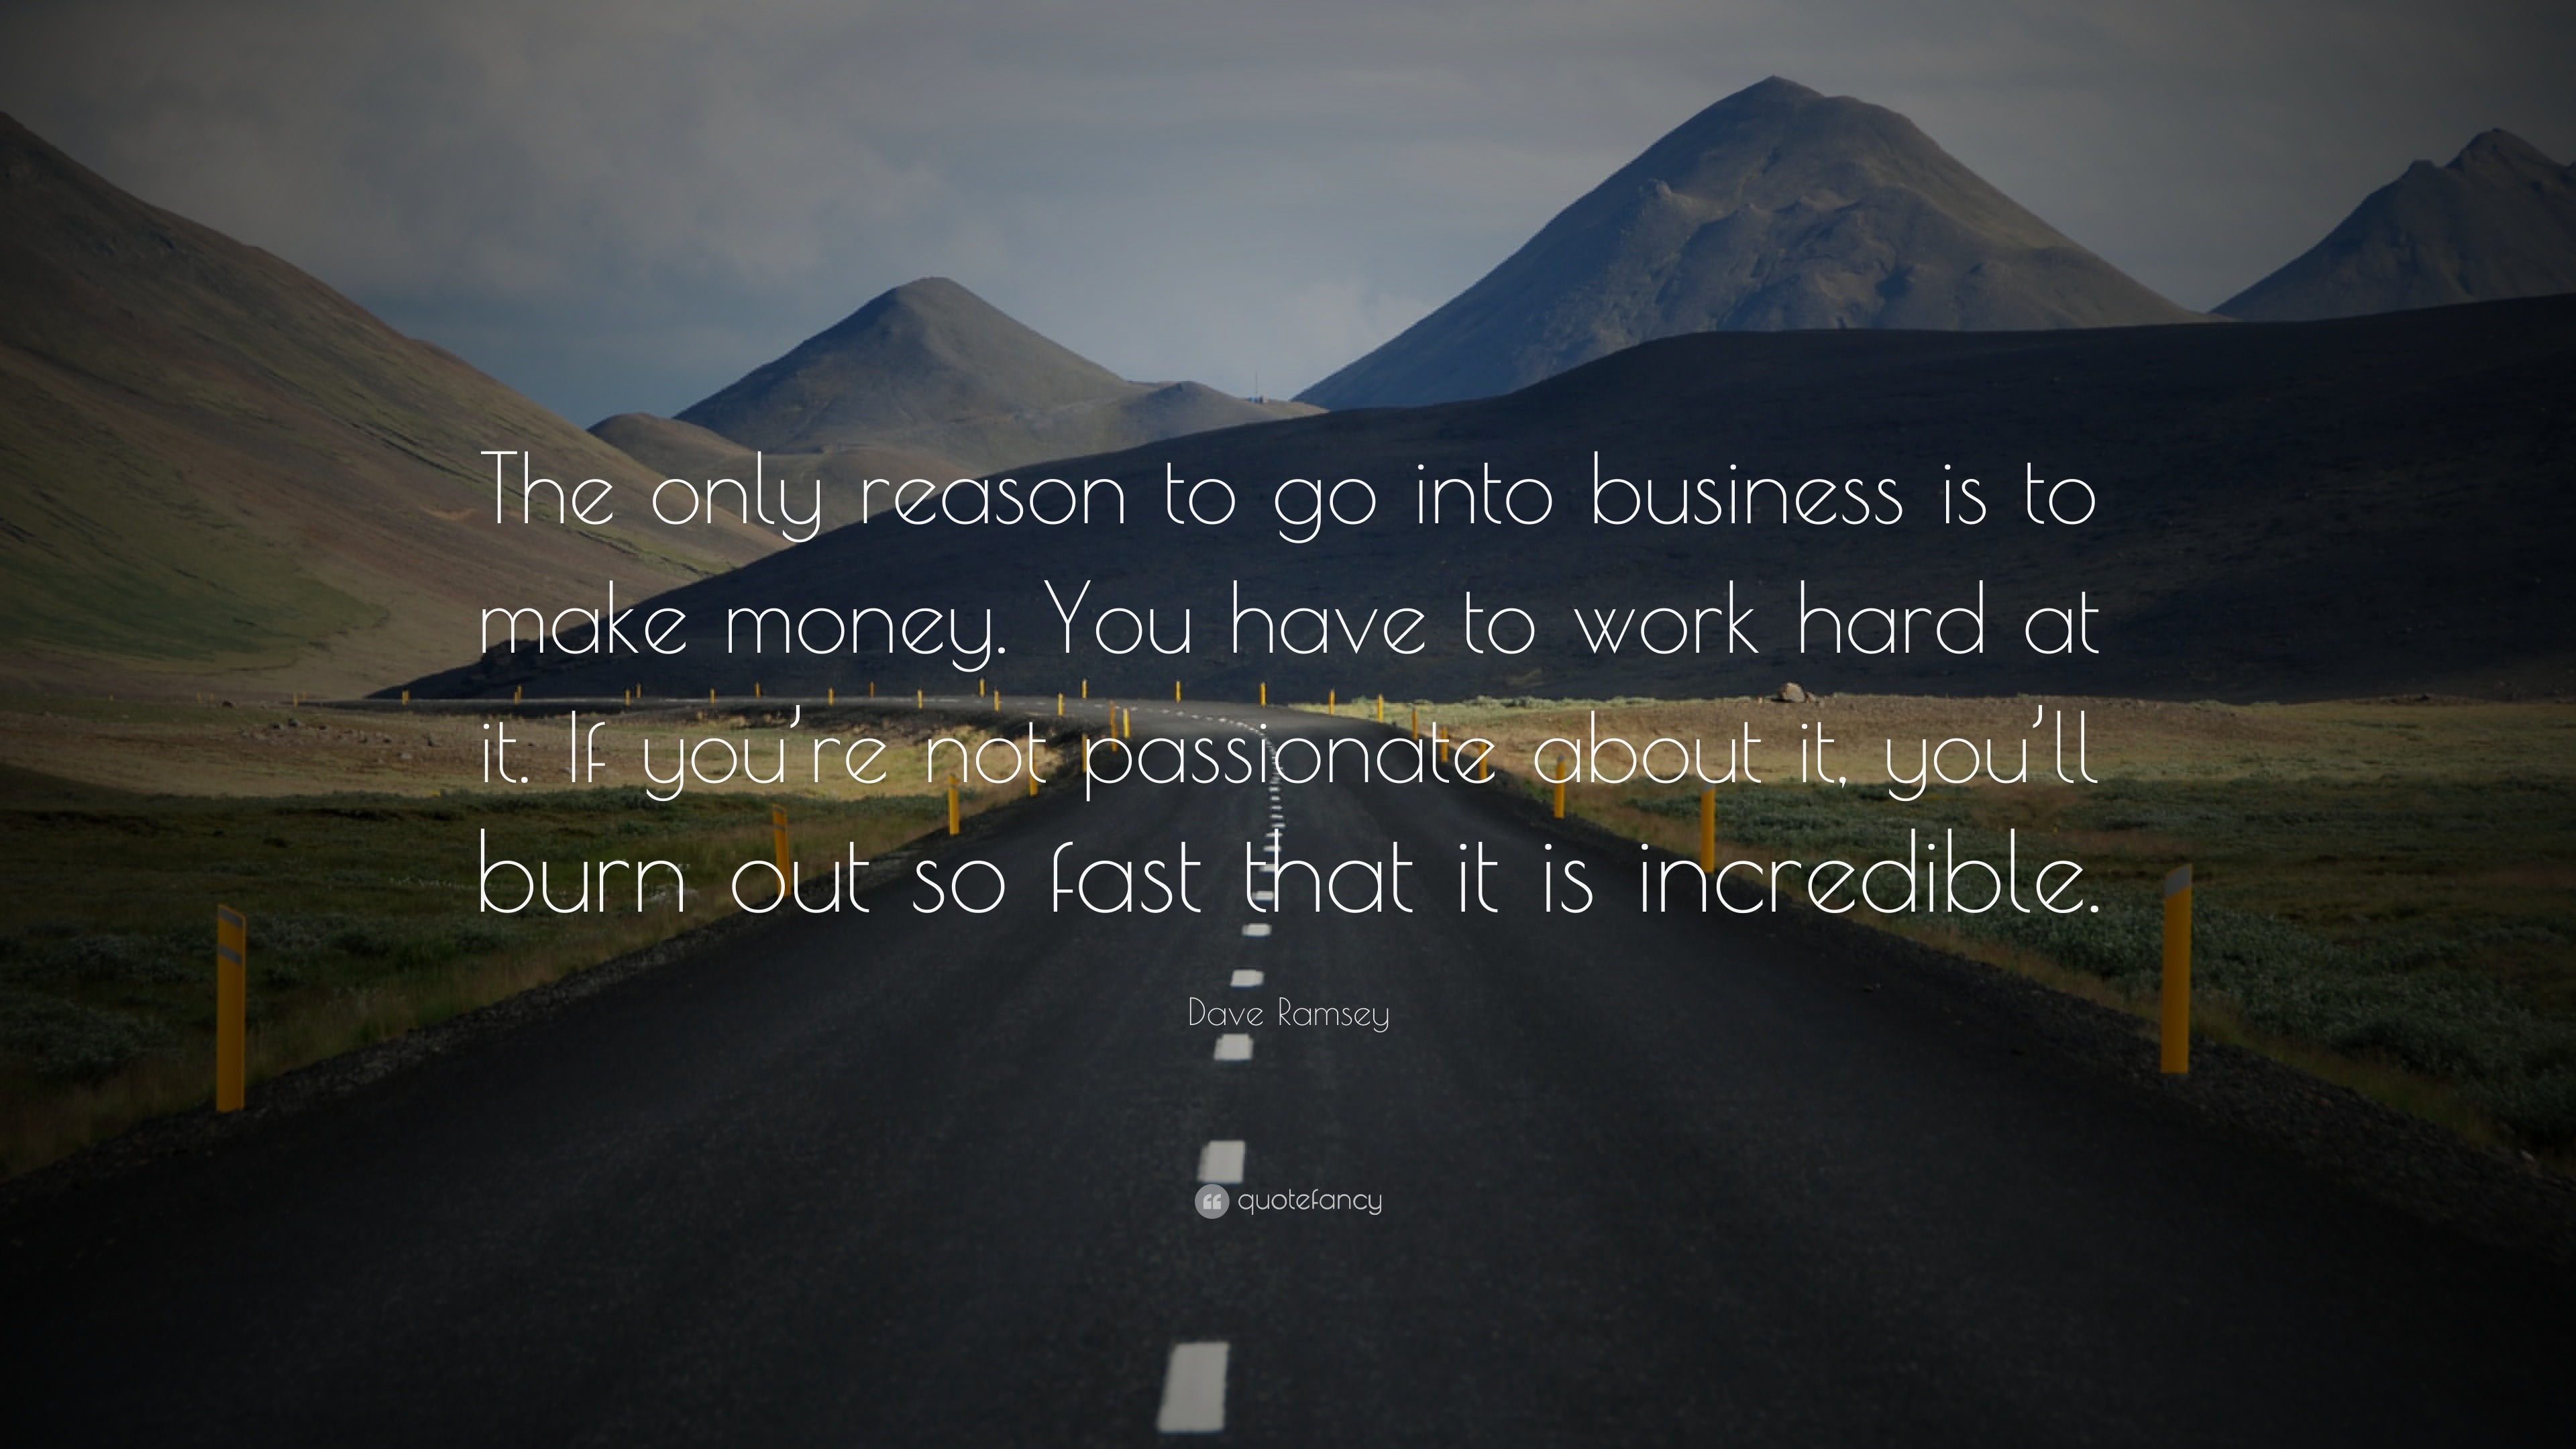 Dave Ramsey Quote: “The only reason to go into business is to make money.  You have to work hard at it. If you're not passionate about it, yo...”